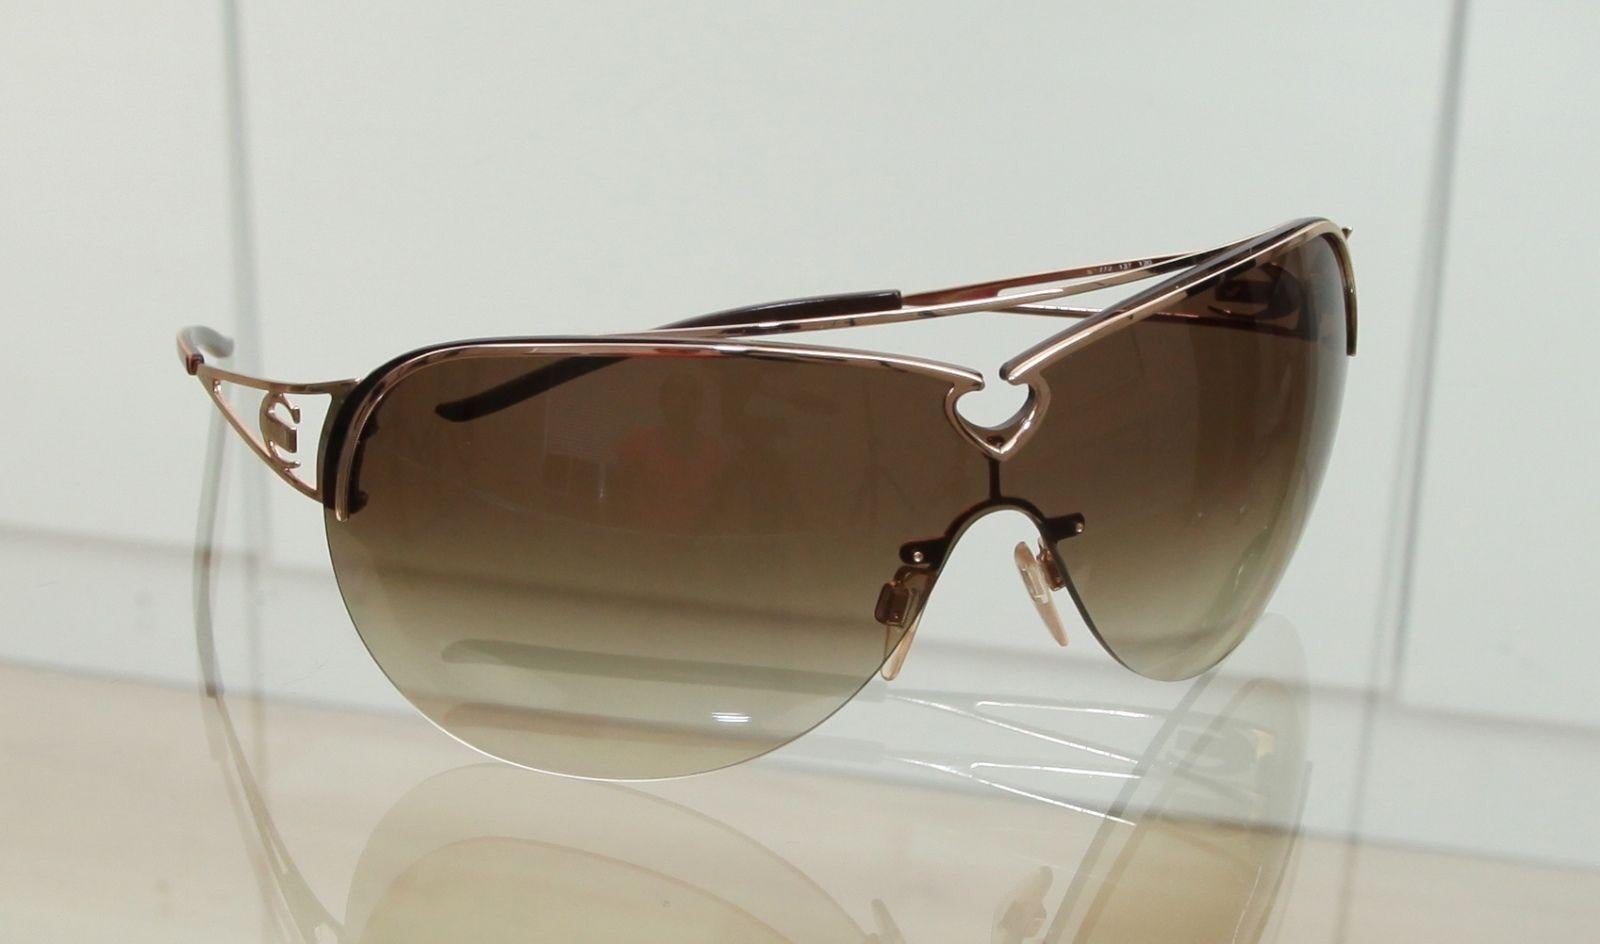 ROBERTO CAVALLI BROWN GRADIENT SHIELD SUNGLASSES

Lens: Brown

Details: 
 - Gold Frame with front cut out heart shape design
 - Gold-tone metal arms
 - Cavalli logo at corners
 - Comes with Roberto Cavalli sunglass case

Condition: Gently worn.  No